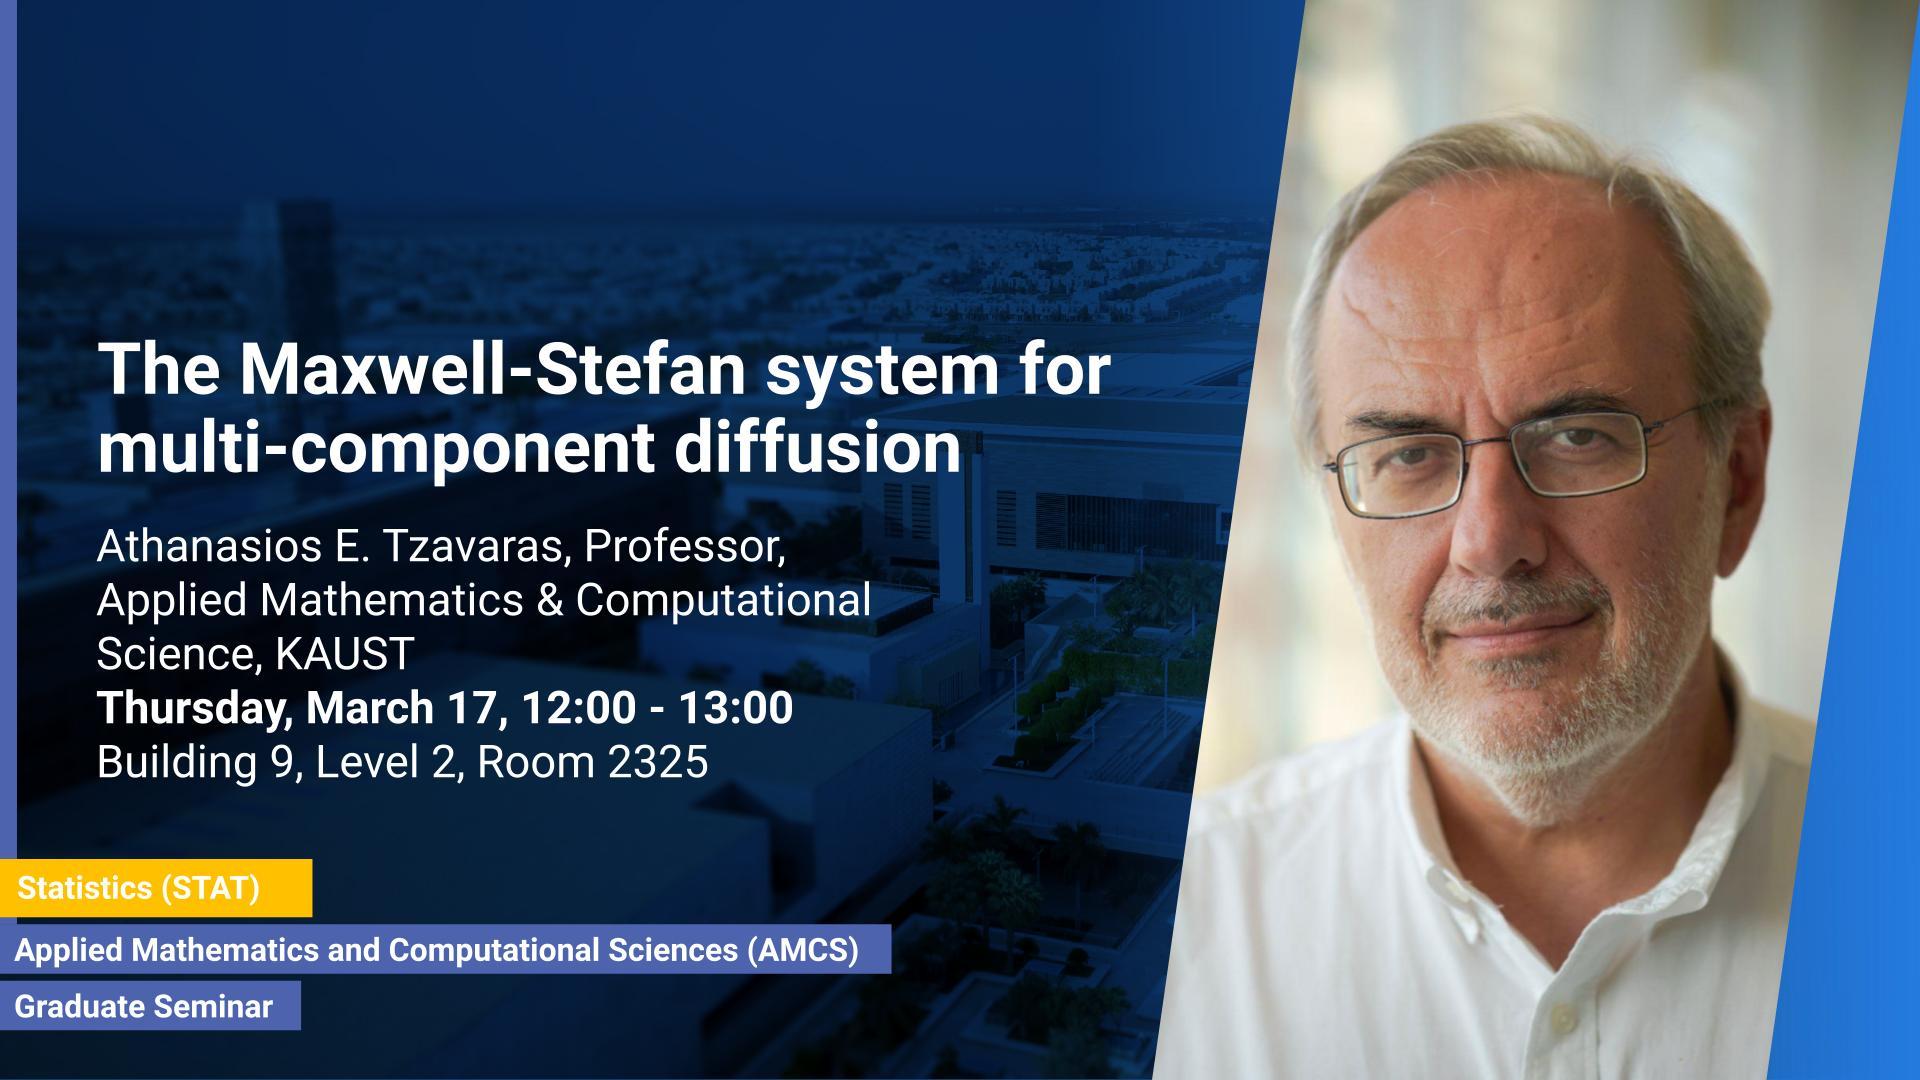 KAUST CEMSE AMCS STAT Graduate Seminar Athanasios Tzavaras The Maxwell-Stefan system for multi-component diffusion